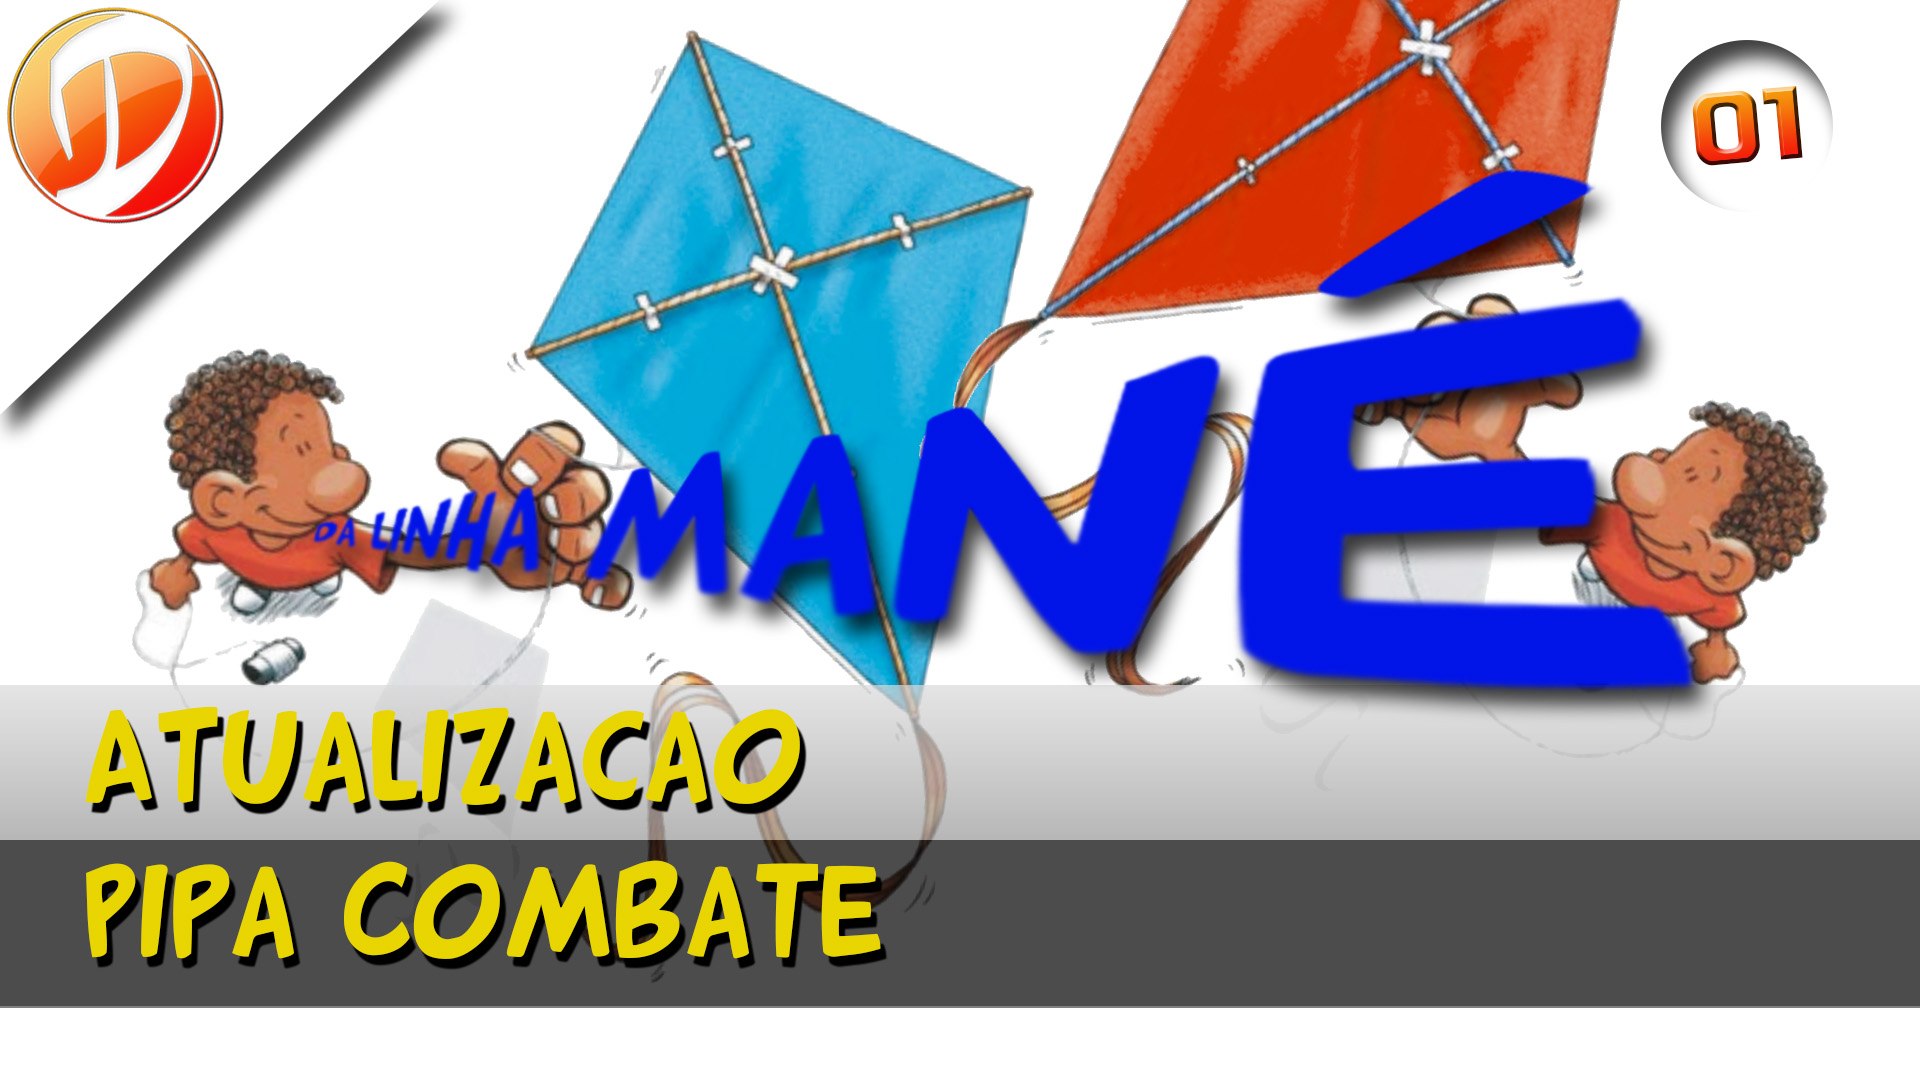 About: Pipa Combate Online (Google Play version)